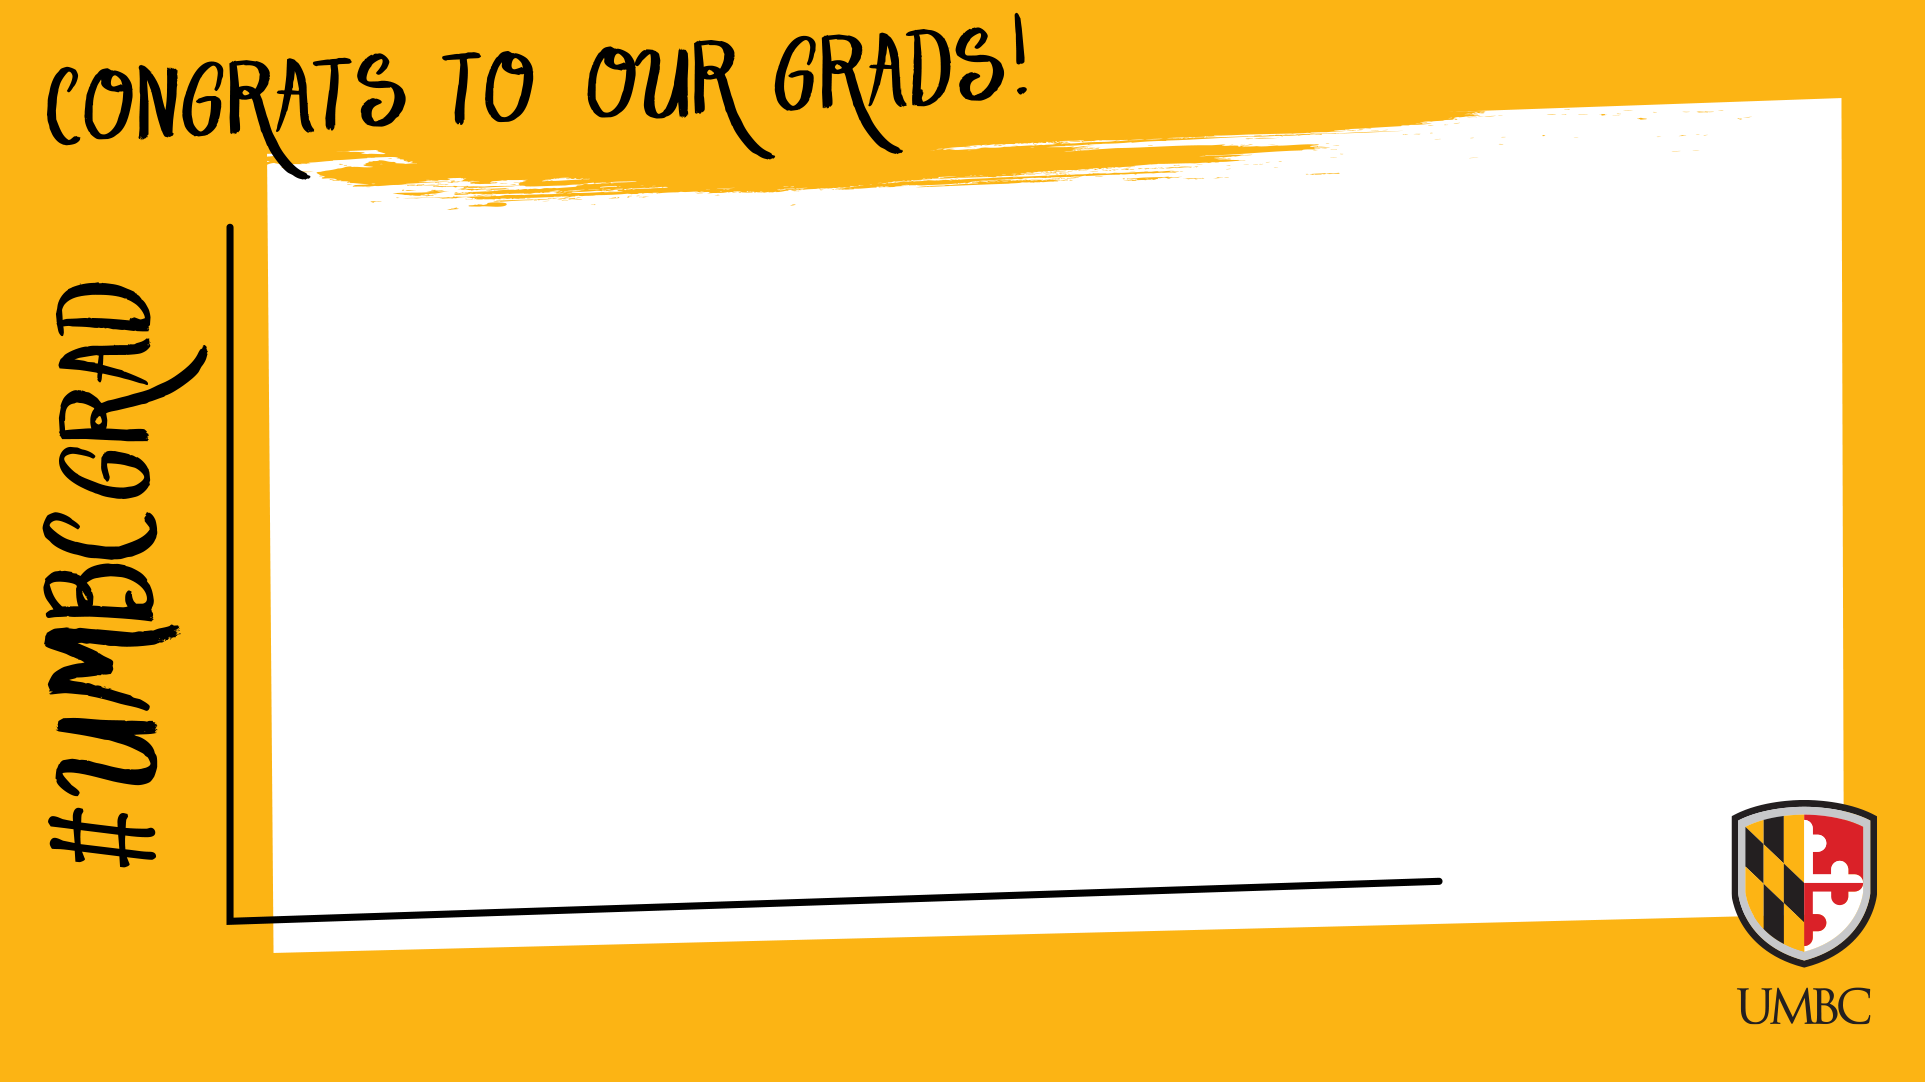 Gold landscape photo frame overlay with Congrats to our Grads on top border, #UMBCGrads on left border and UMBC logo on lower right corner.